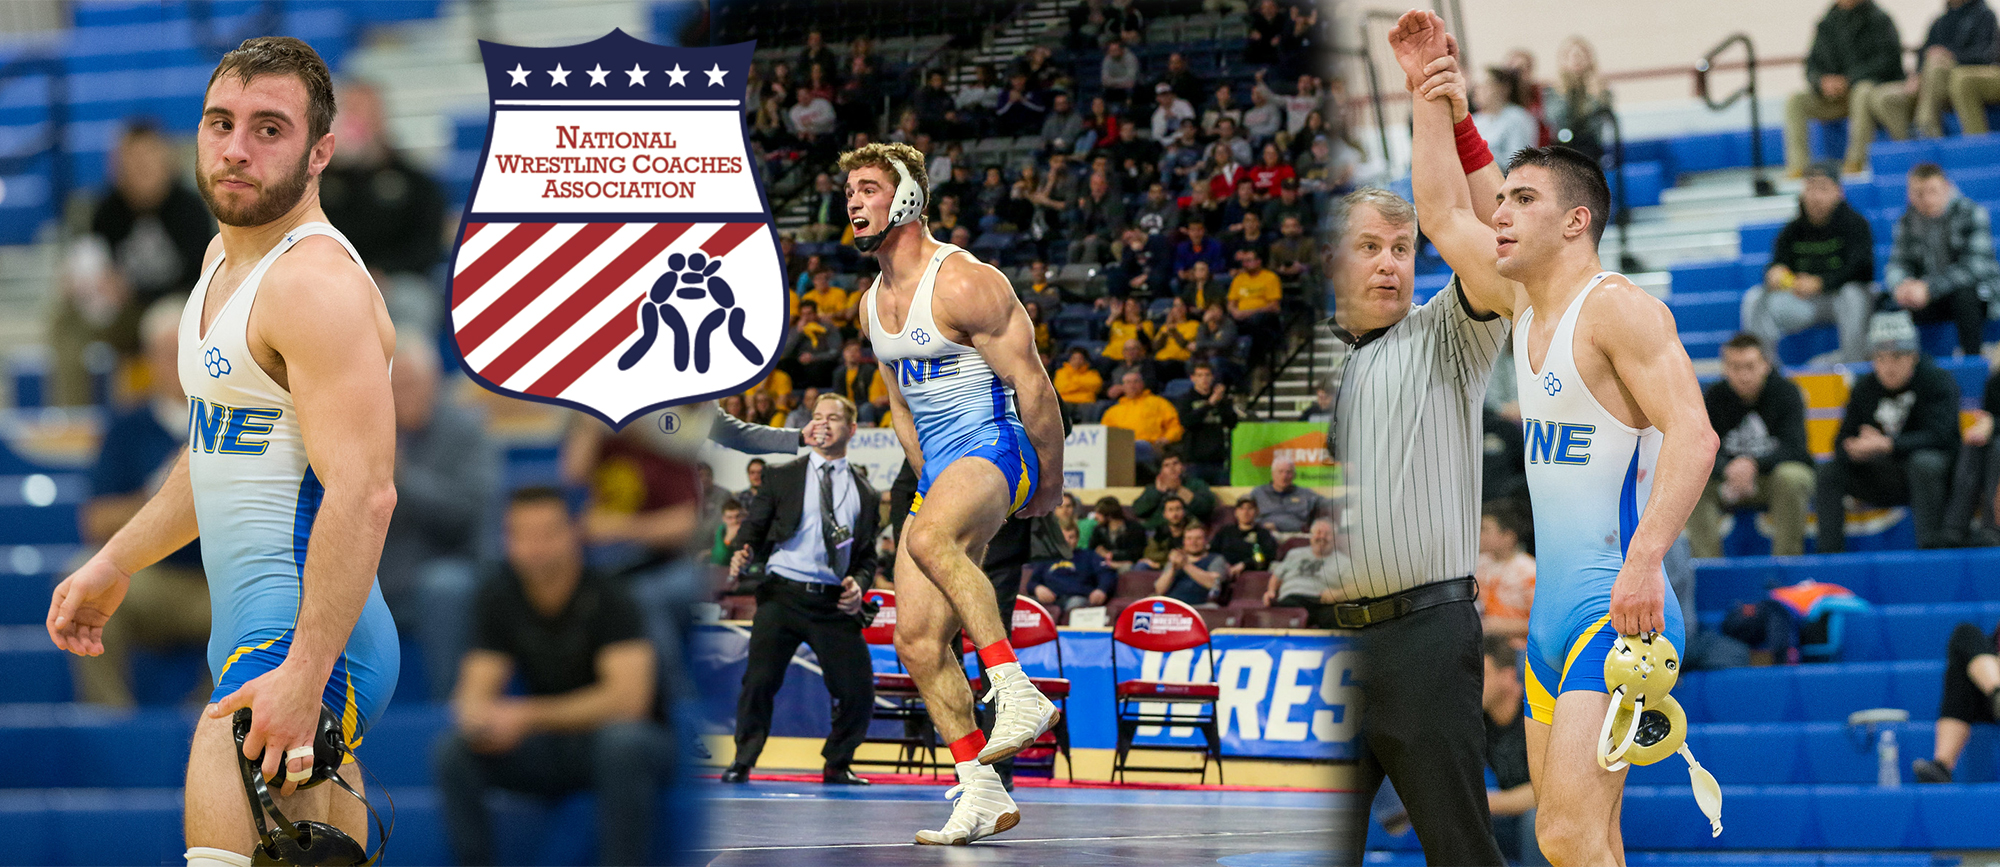 Three Golden Bears Featured in Latest National Wrestling Coaches Association National Rankings